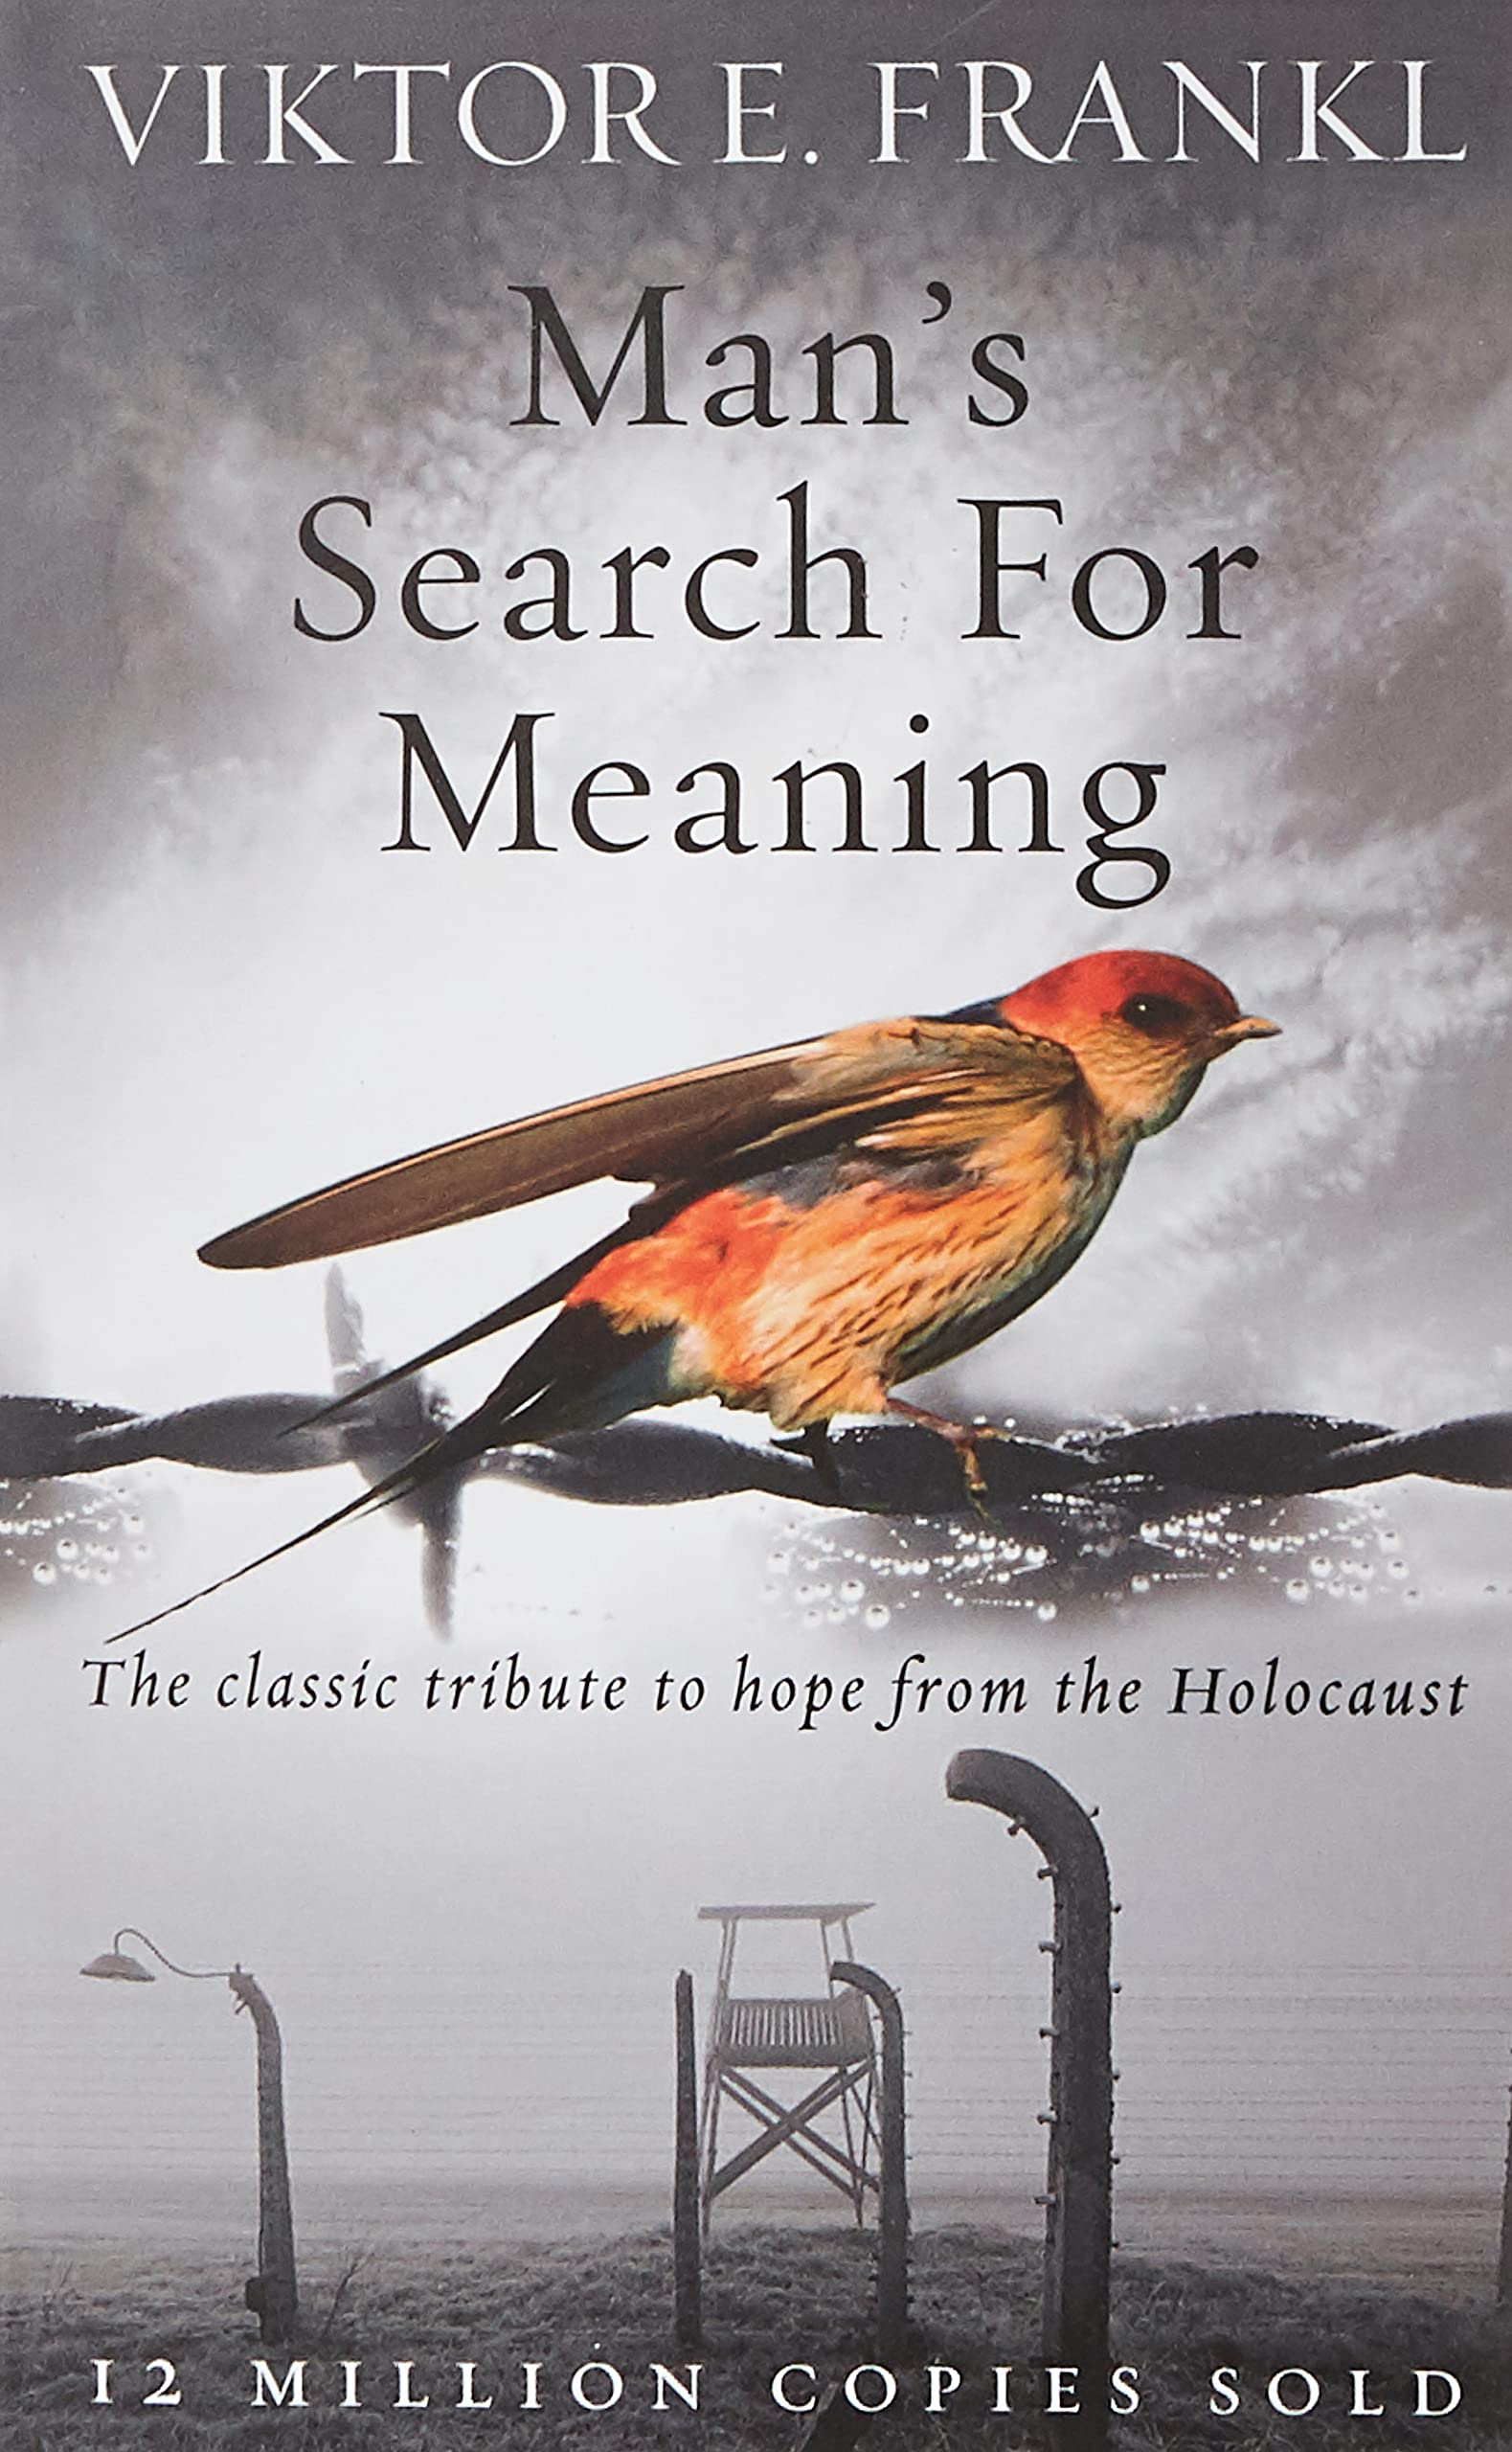 Man’s search for meaning by Viktor E. Frankl